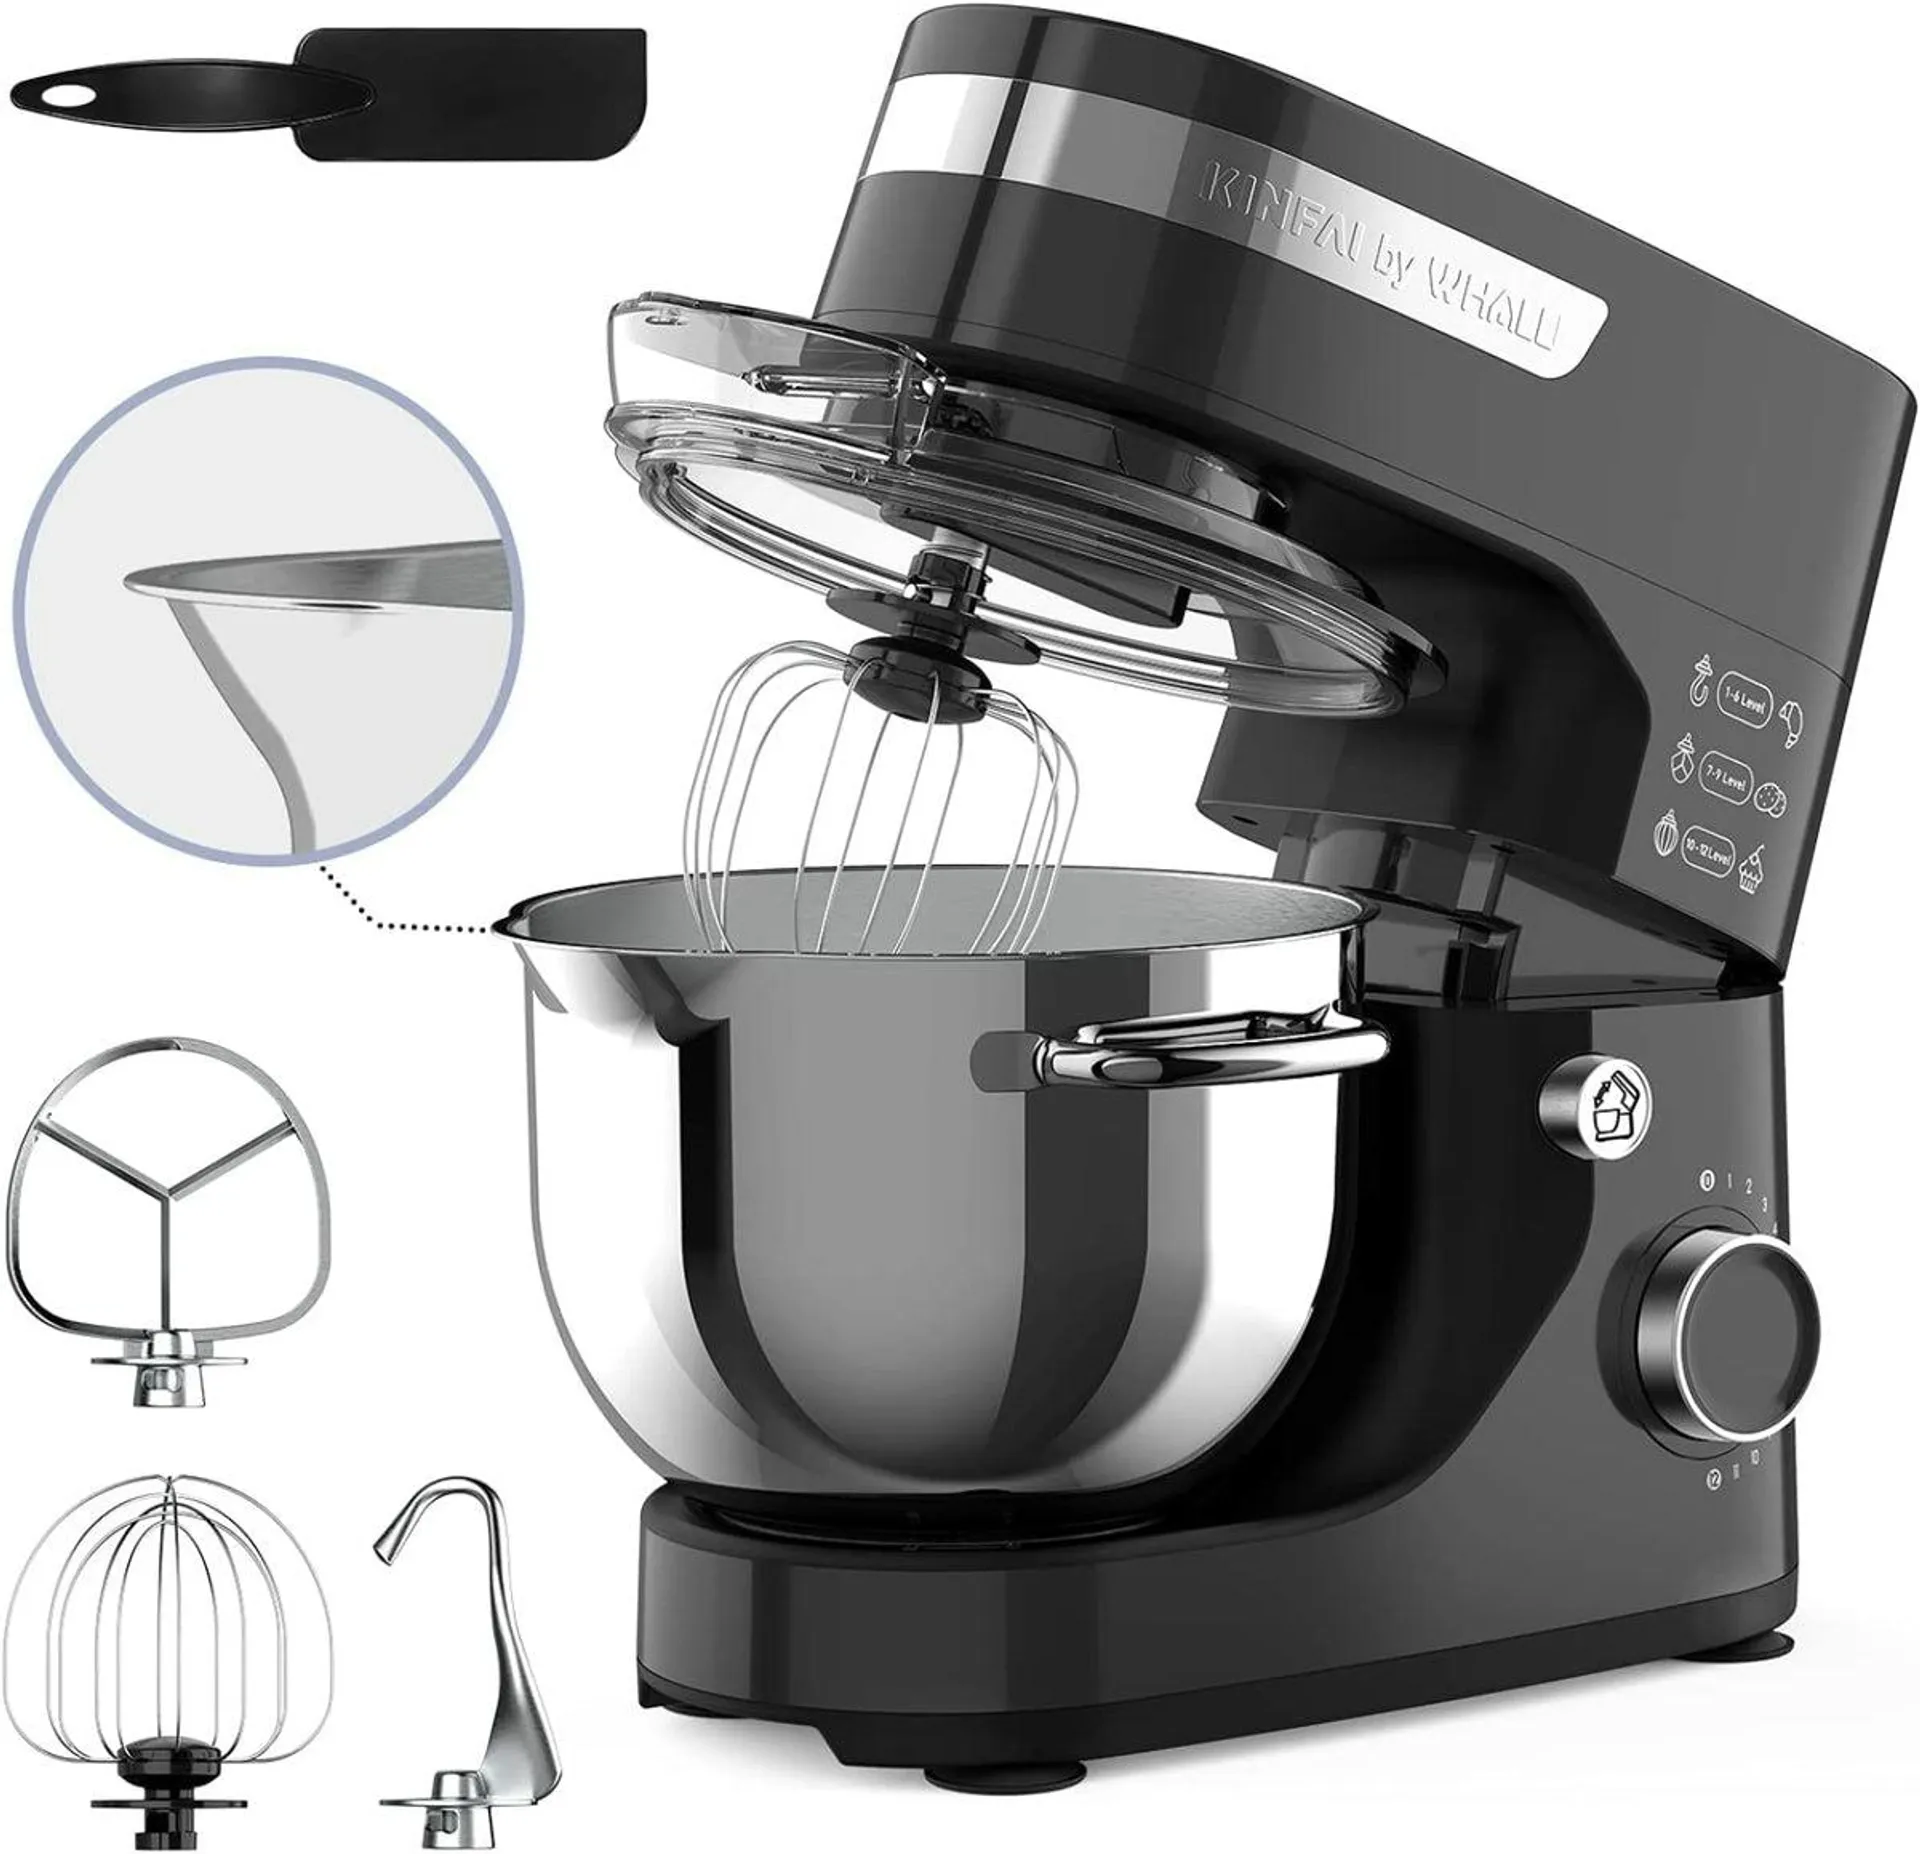 Whall Kinfai Electric Kitchen Stand Mixer Machine With 4.5 Quart Bowl For Baking, Dough, Cooking